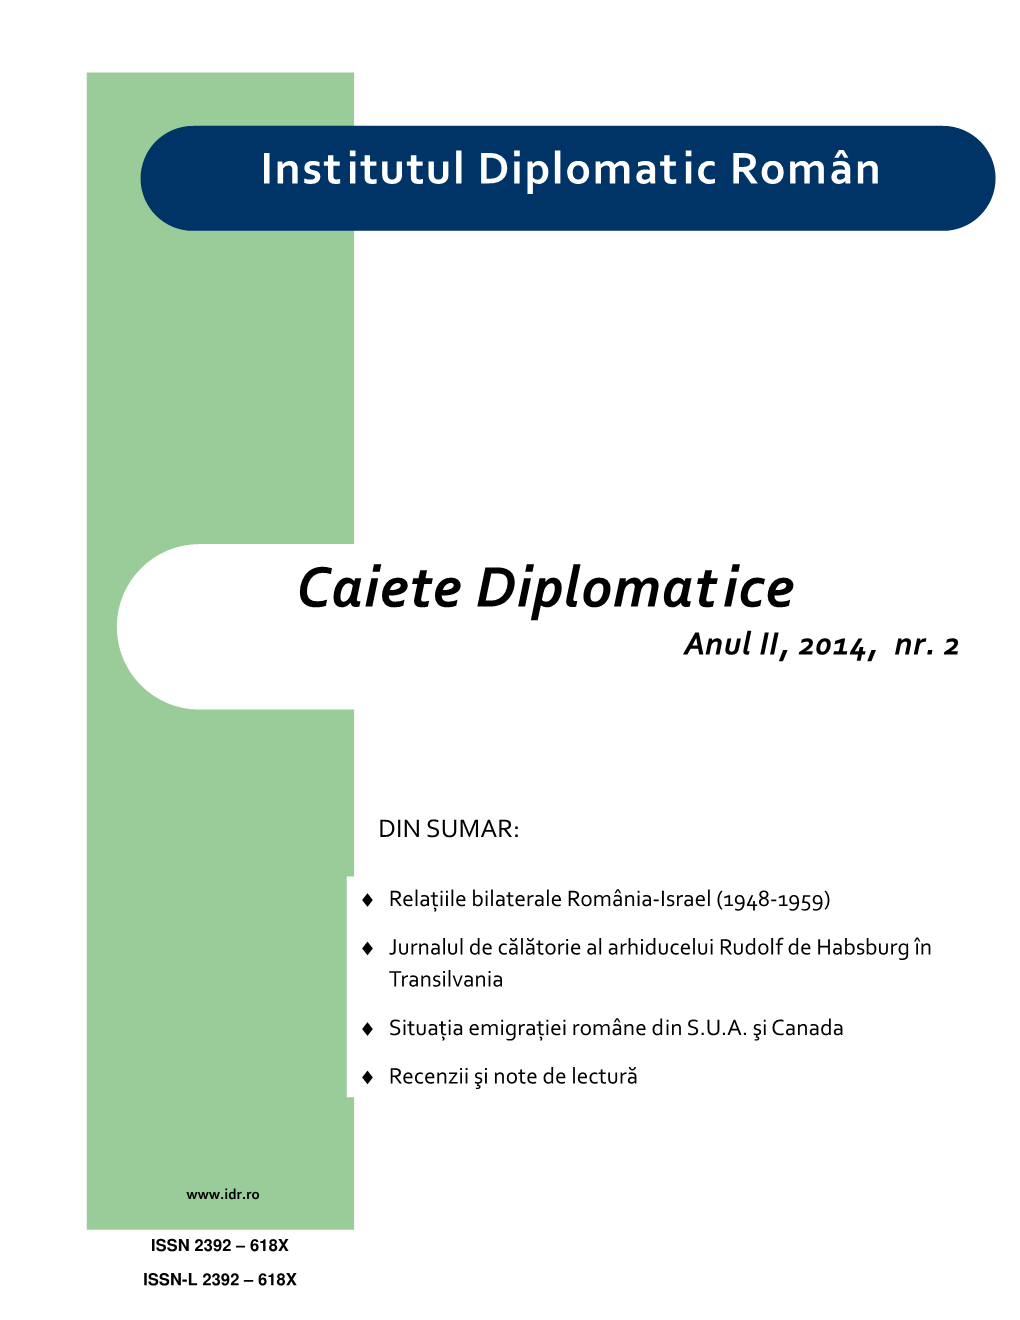 Caiete Diplomatice Anul II, 2014, Nr